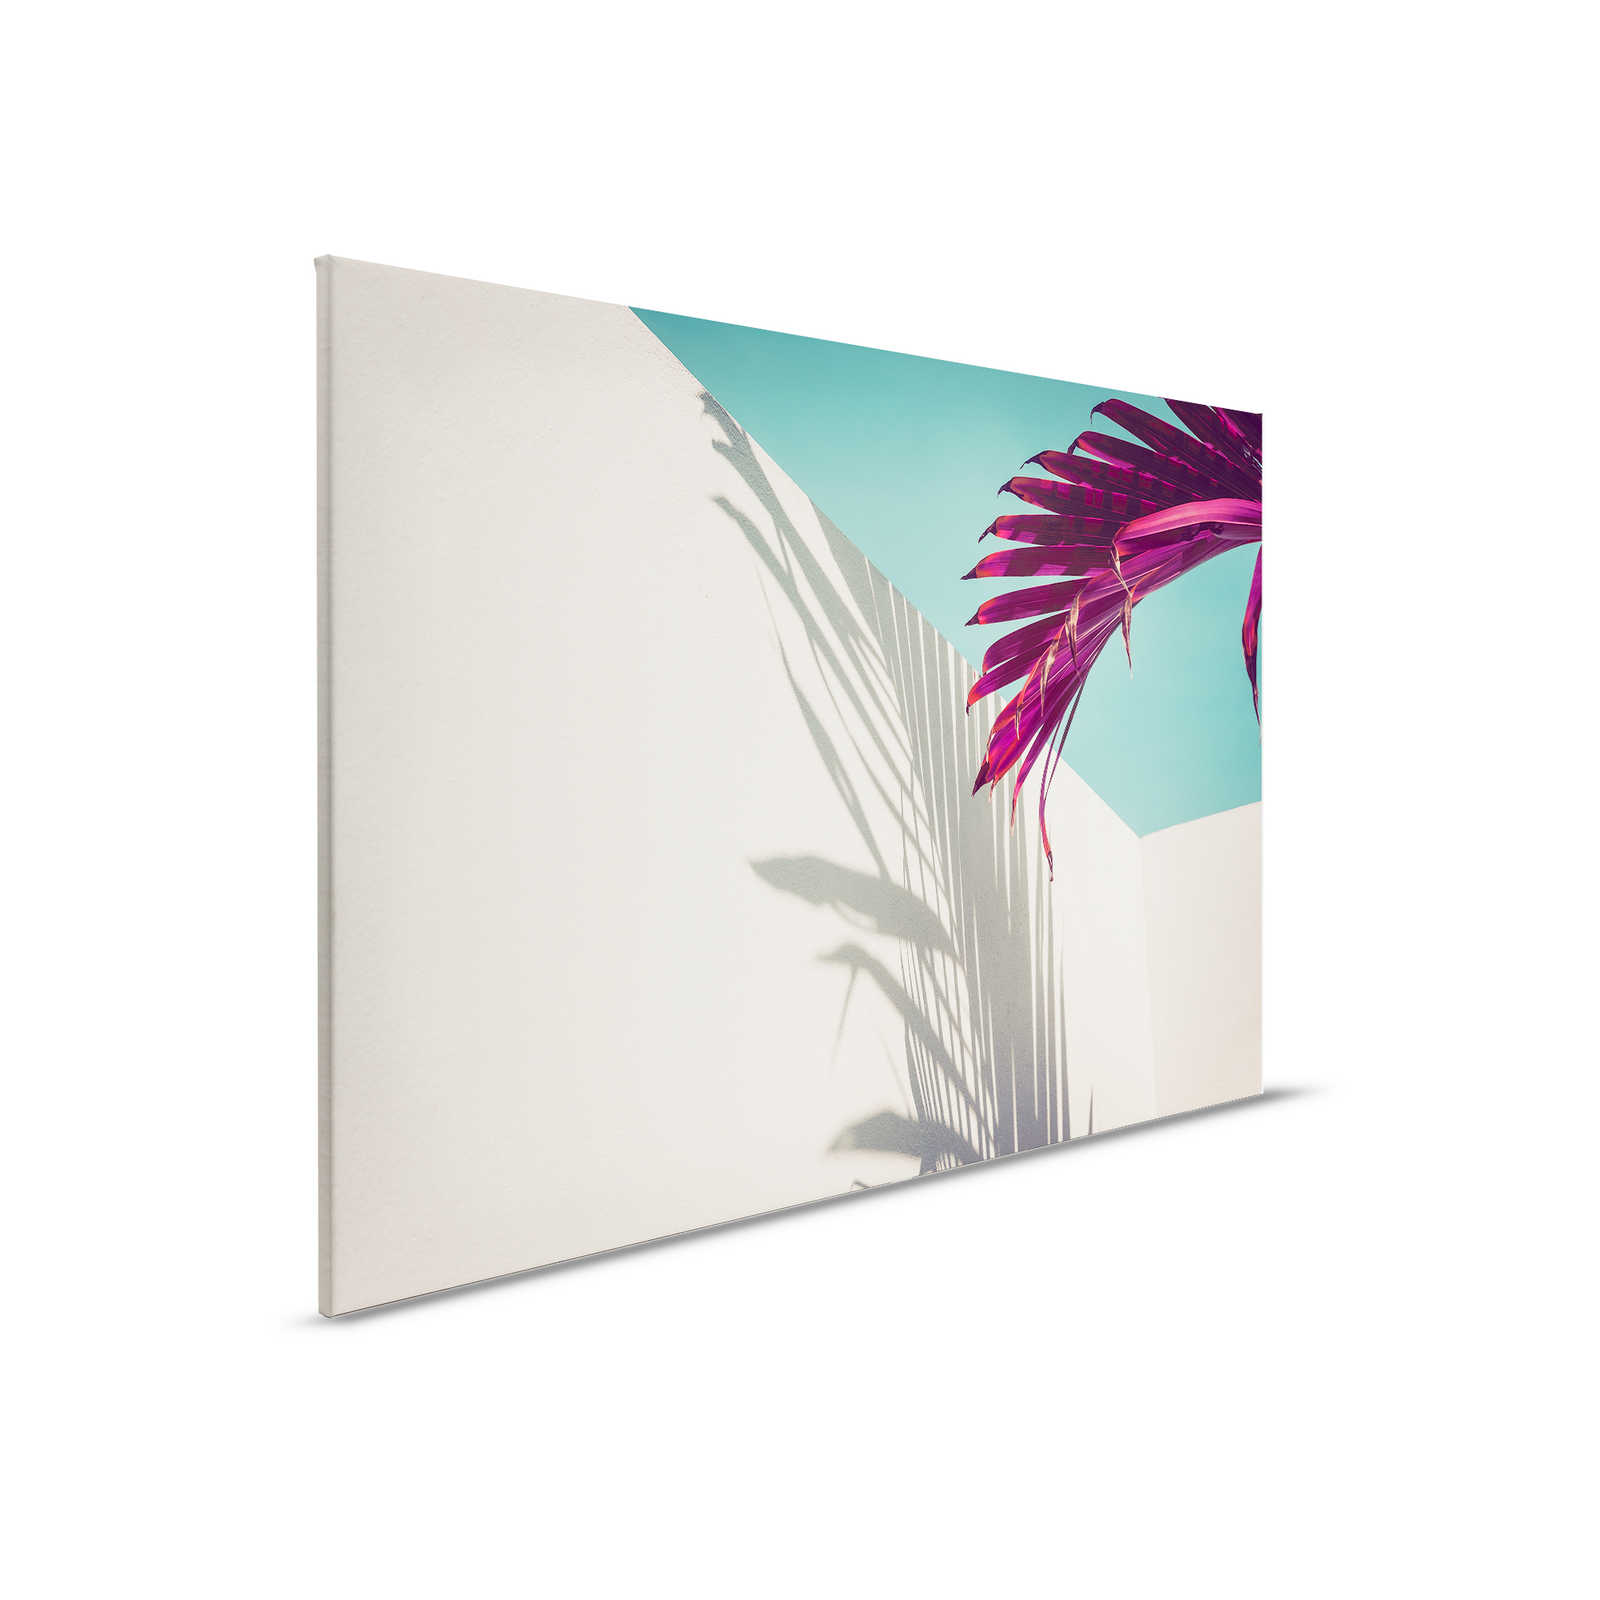         Canvas painting with palm leaf and shadow on concrete wall - 0.90 m x 0.60 m
    